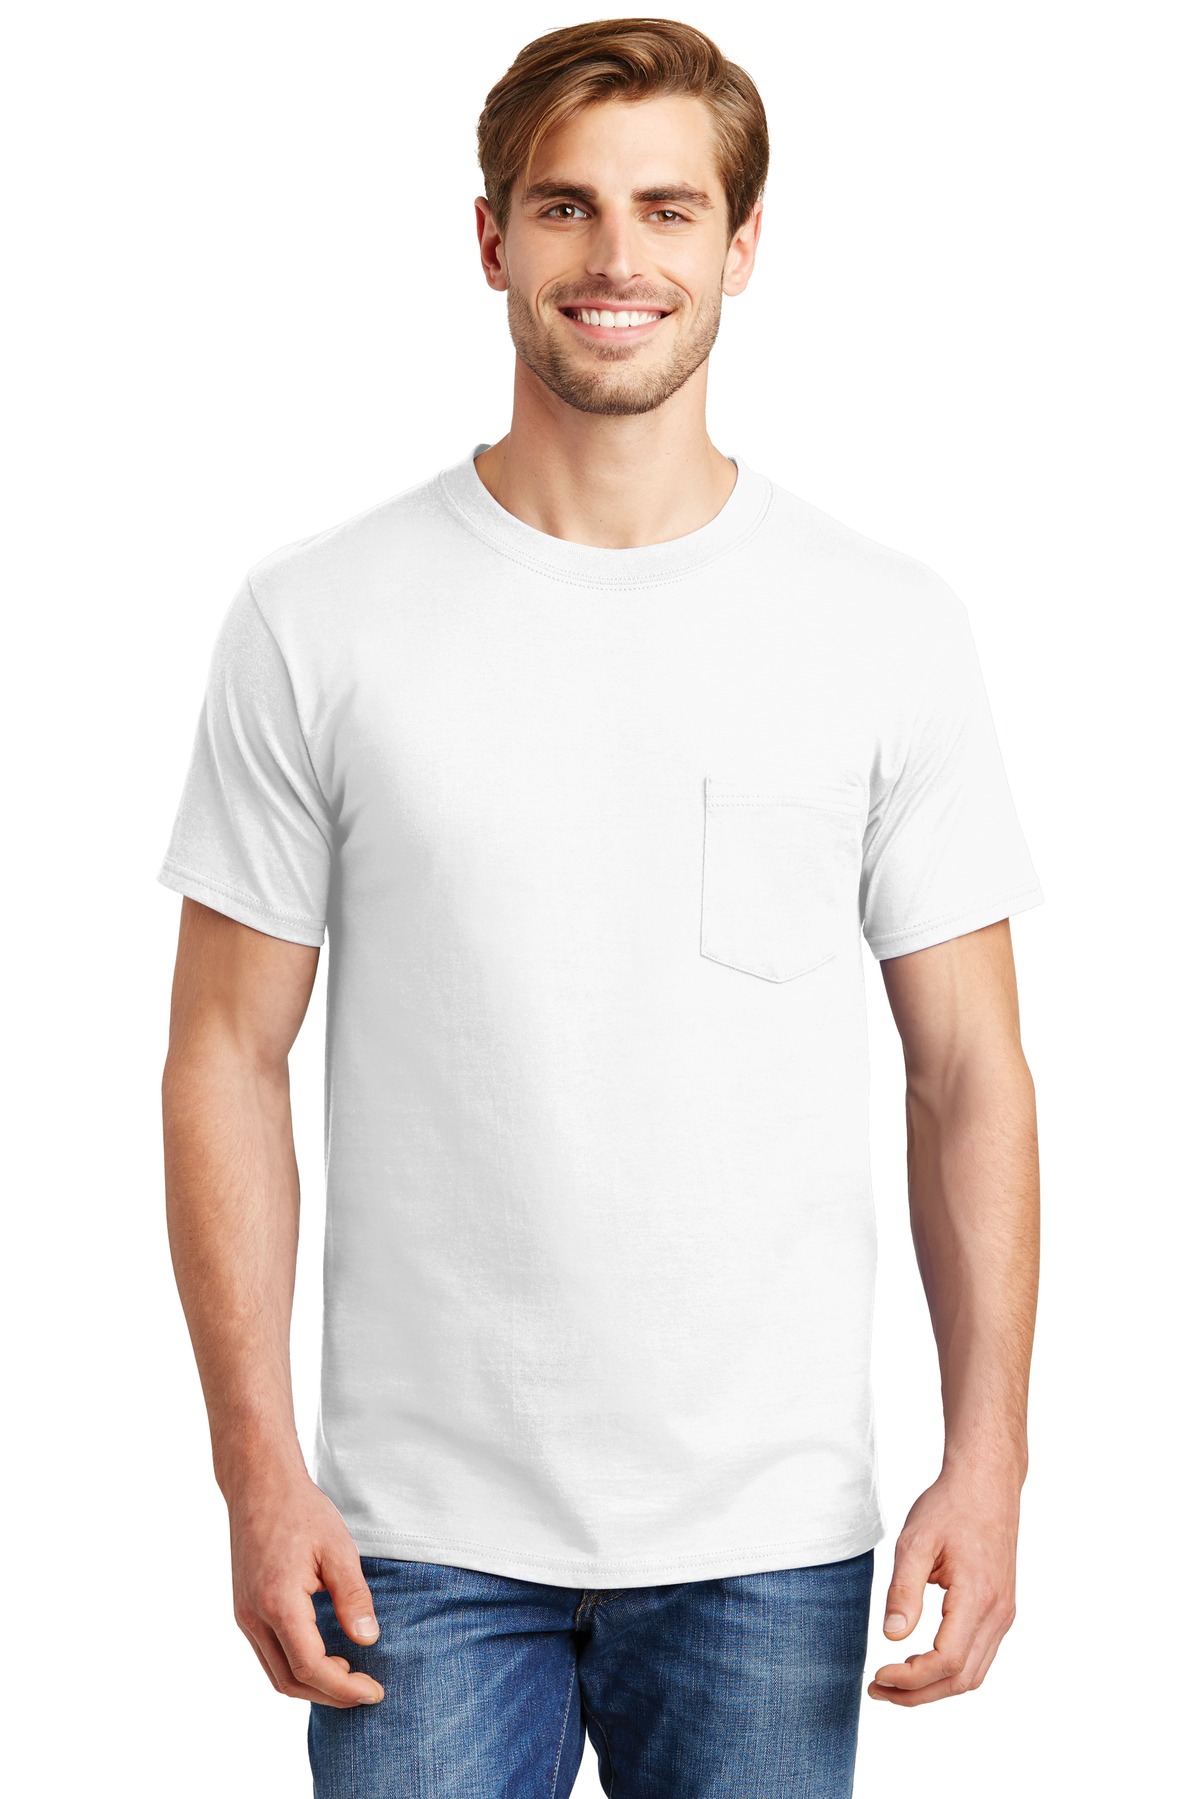 Hanes Beefy-T - 100% Cotton T-Shirt with Pocket-Hanes